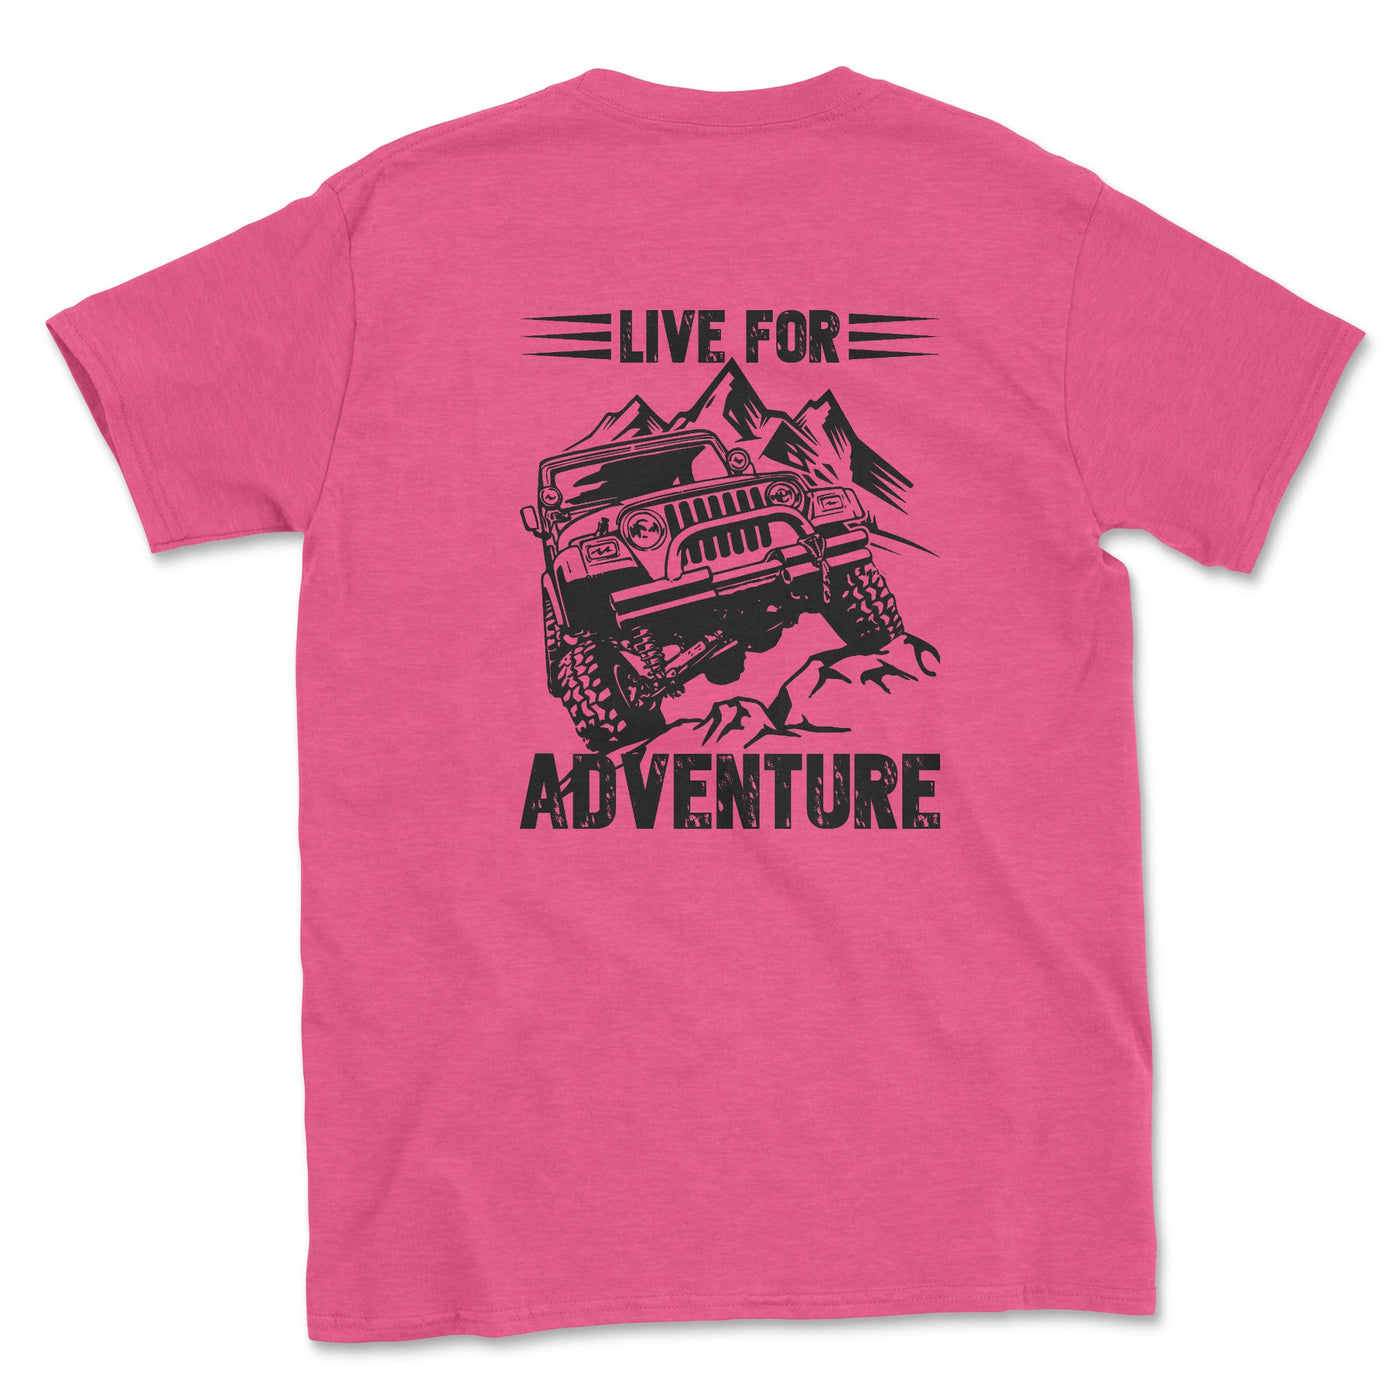 Live for Adventure T-shirt - Goats Trail Off-Road Apparel Company